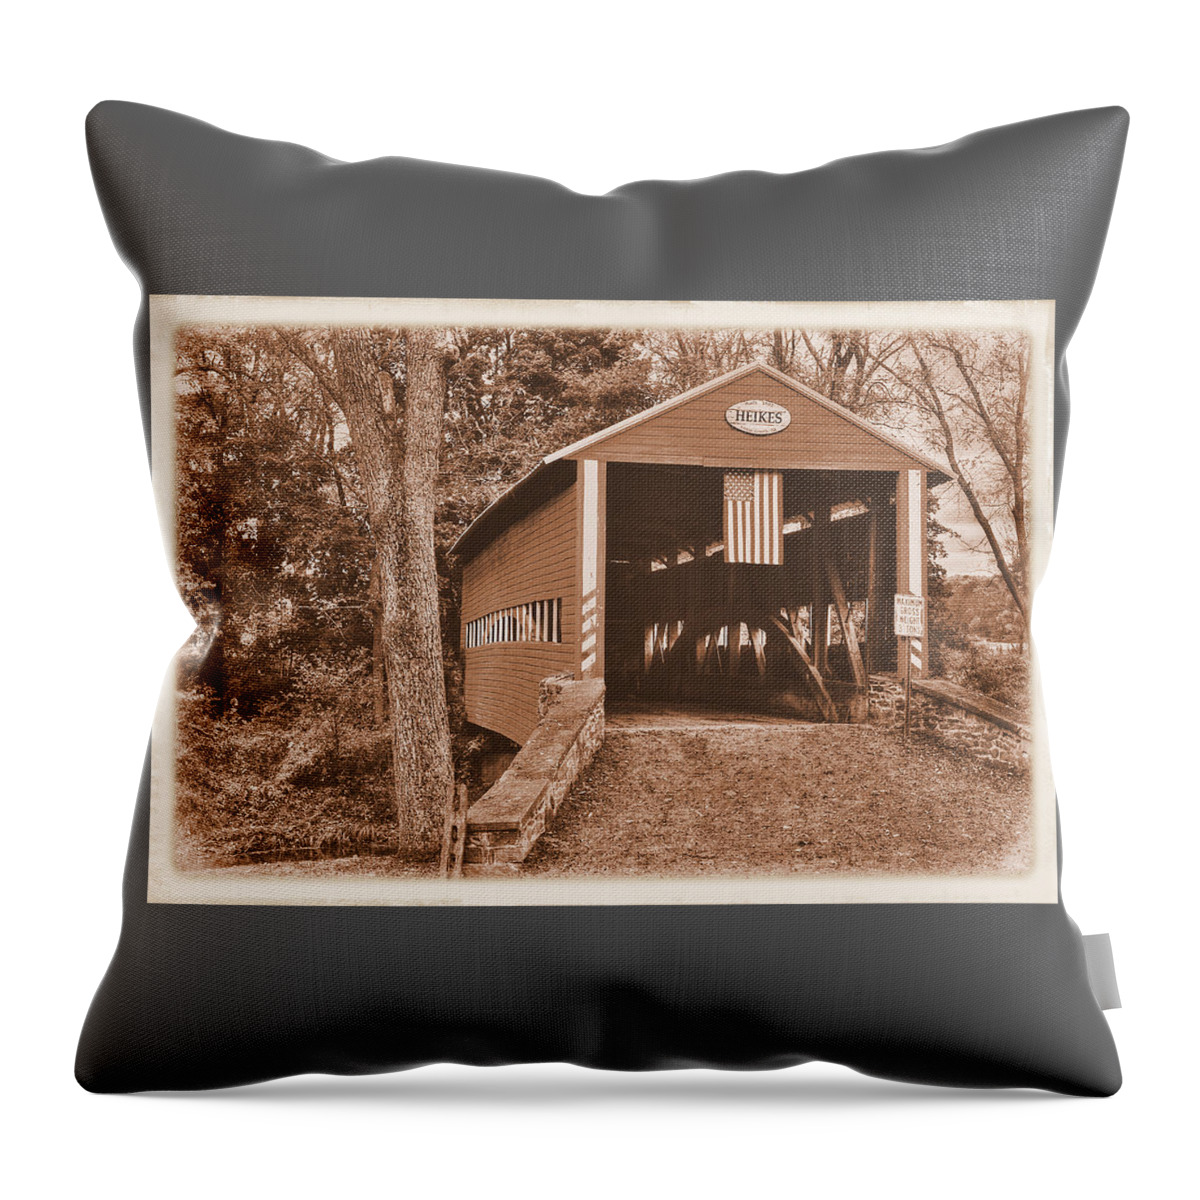 Heikes Covered Bridge Throw Pillow featuring the photograph Pennsylvania Country Roads - Heikes Covered Bridge Over Bermudian Creek Sepia - Adams County by Michael Mazaika